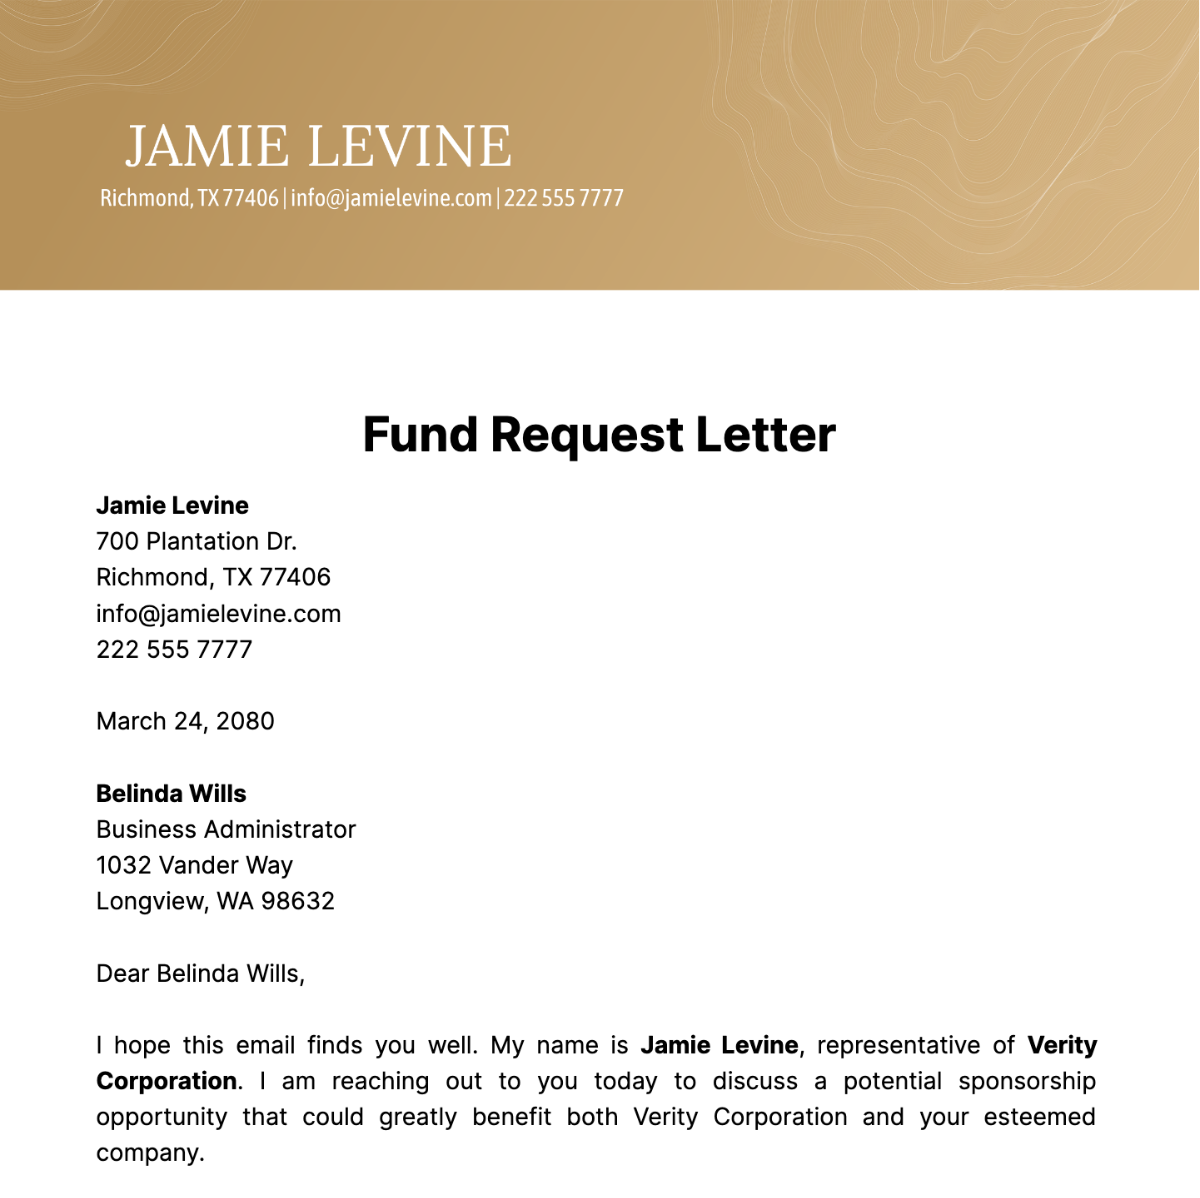 Fund Request Letter  Template